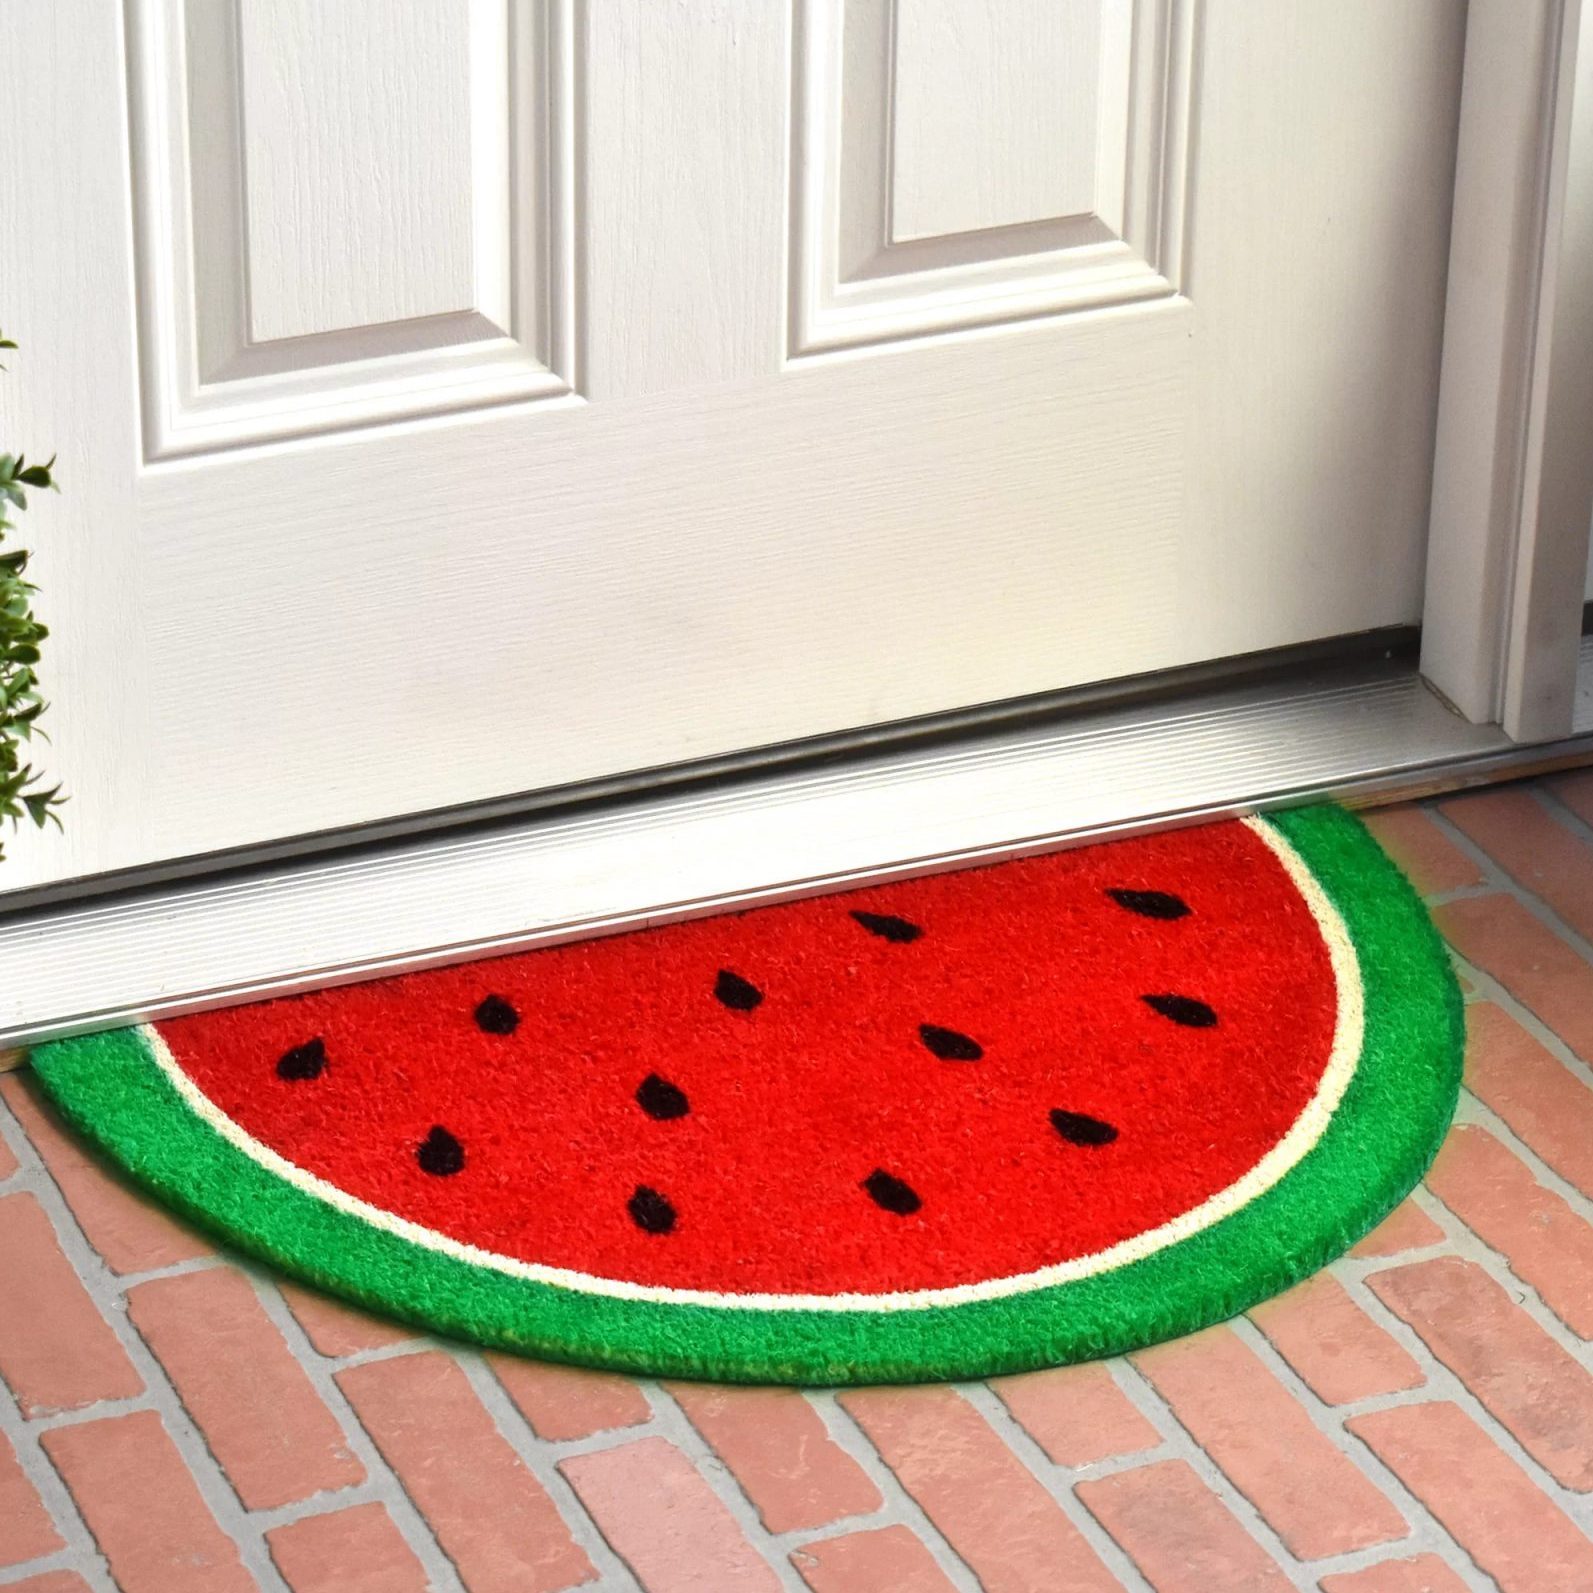 11 Inviting Doormat Ideas That Will Jazz Up Your Entryway